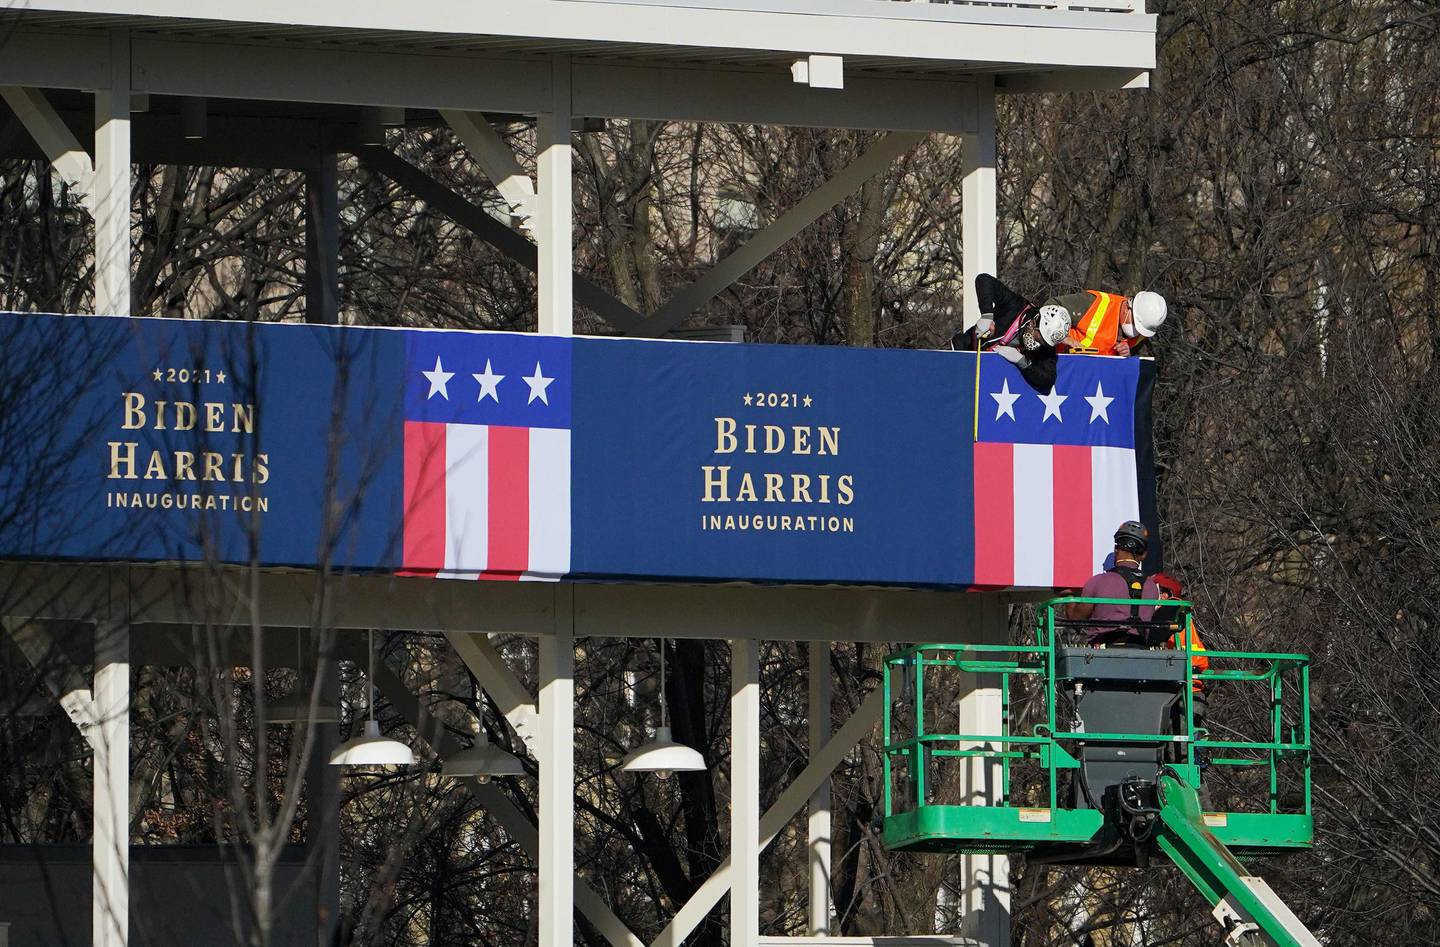 Workers adjust the bunting on a riser across from the White House in Washington, DC on January 14, 2021. - The center of Washington was on lockdown Thursday as more than 20,000 armed National Guard troops were being mobilized due to security concerns ahead of the presidential inauguration of Joe Biden. (Photo by MANDEL NGAN / AFP)